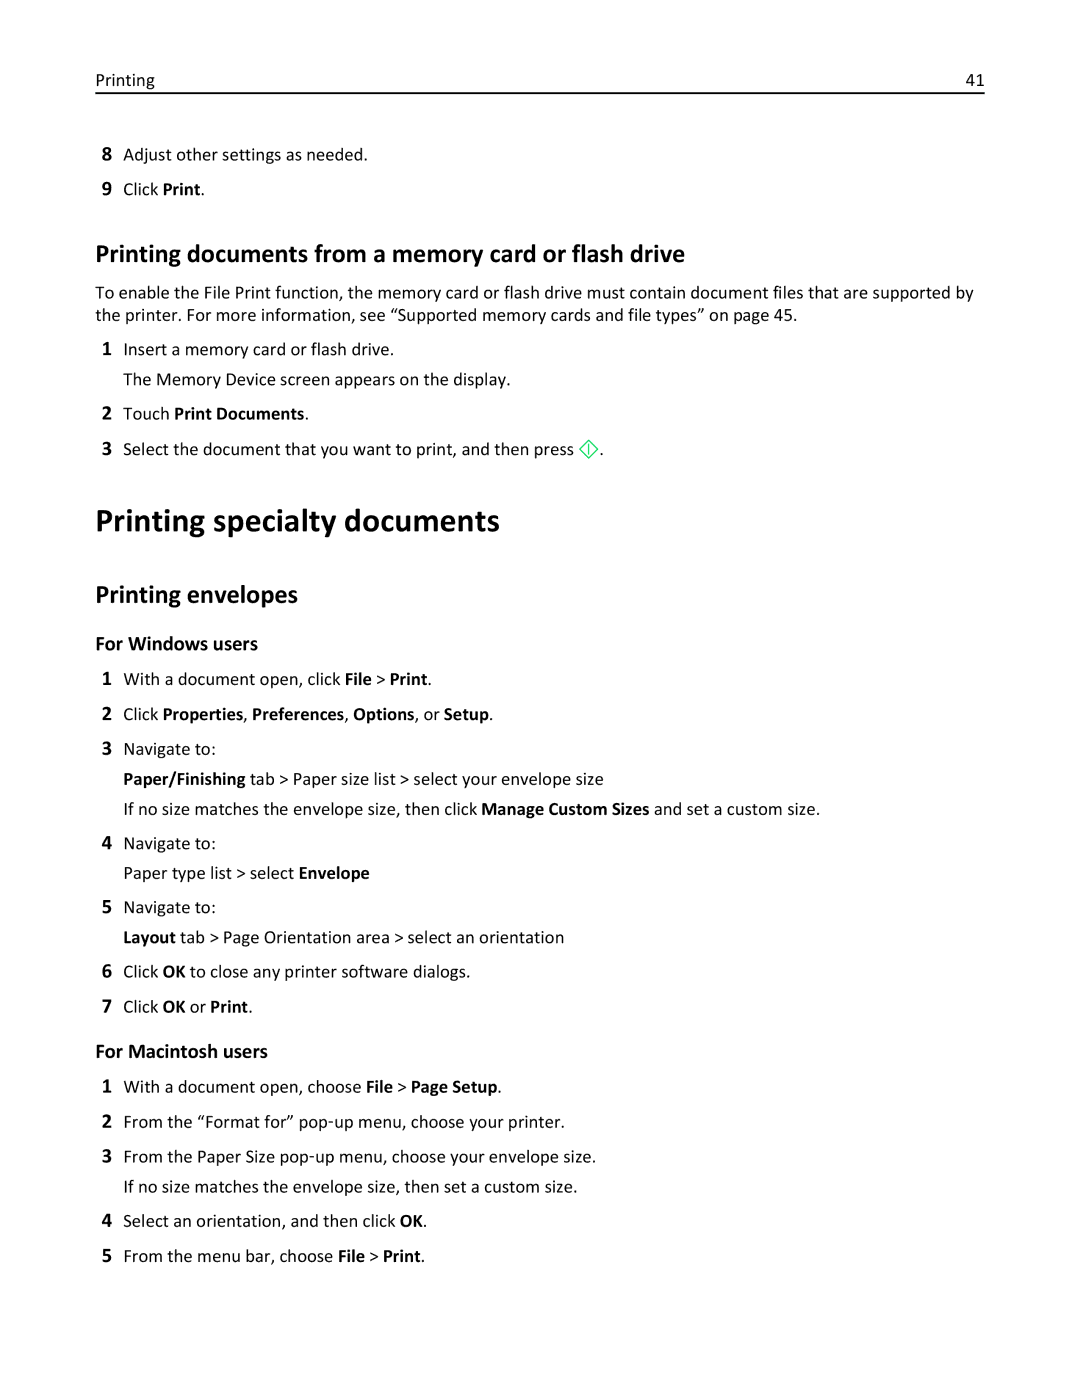 Lexmark Pro915, 901 Printing specialty documents, Printing documents from a memory card or flash drive, Printing envelopes 